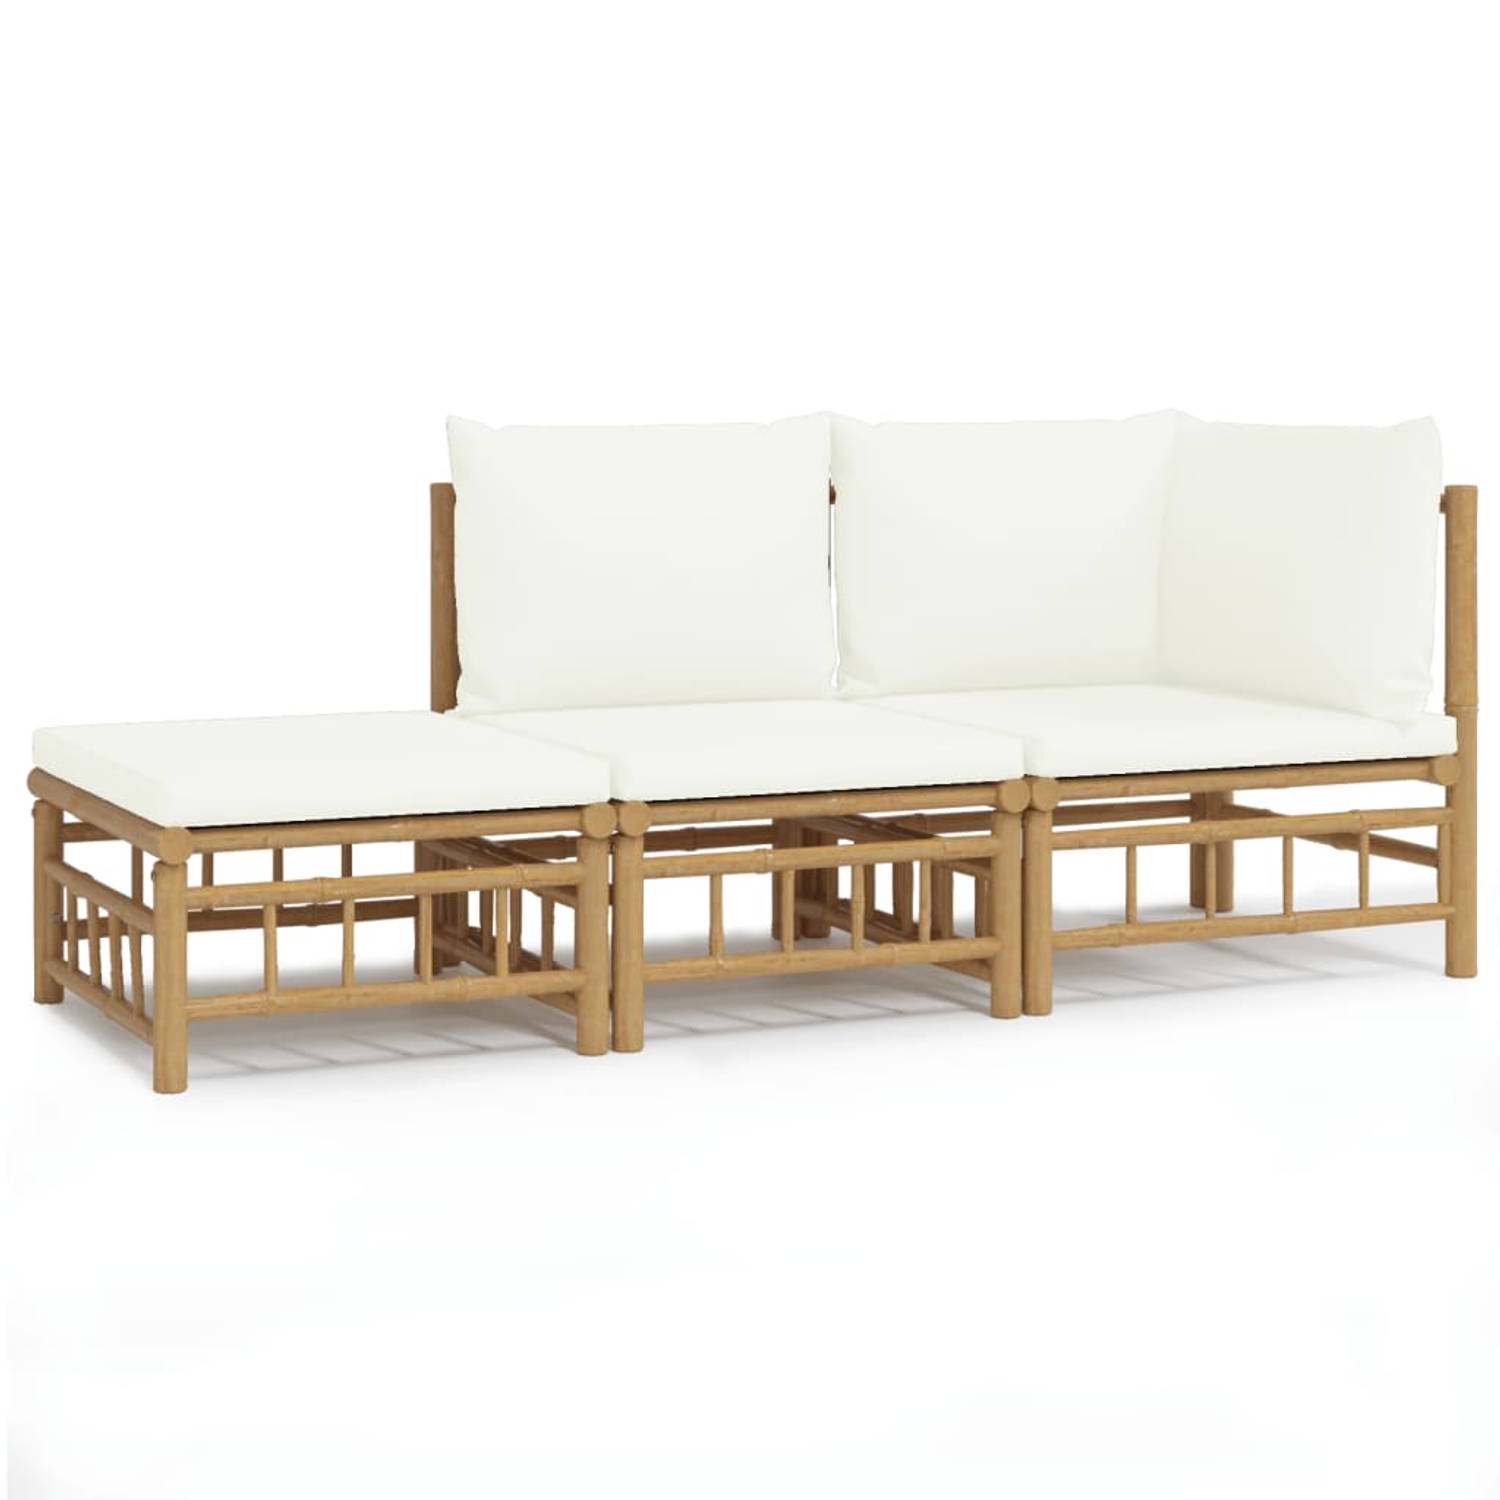 The Living Store 3-delige Loungeset met kussens bamboe crèmewit - Tuinset